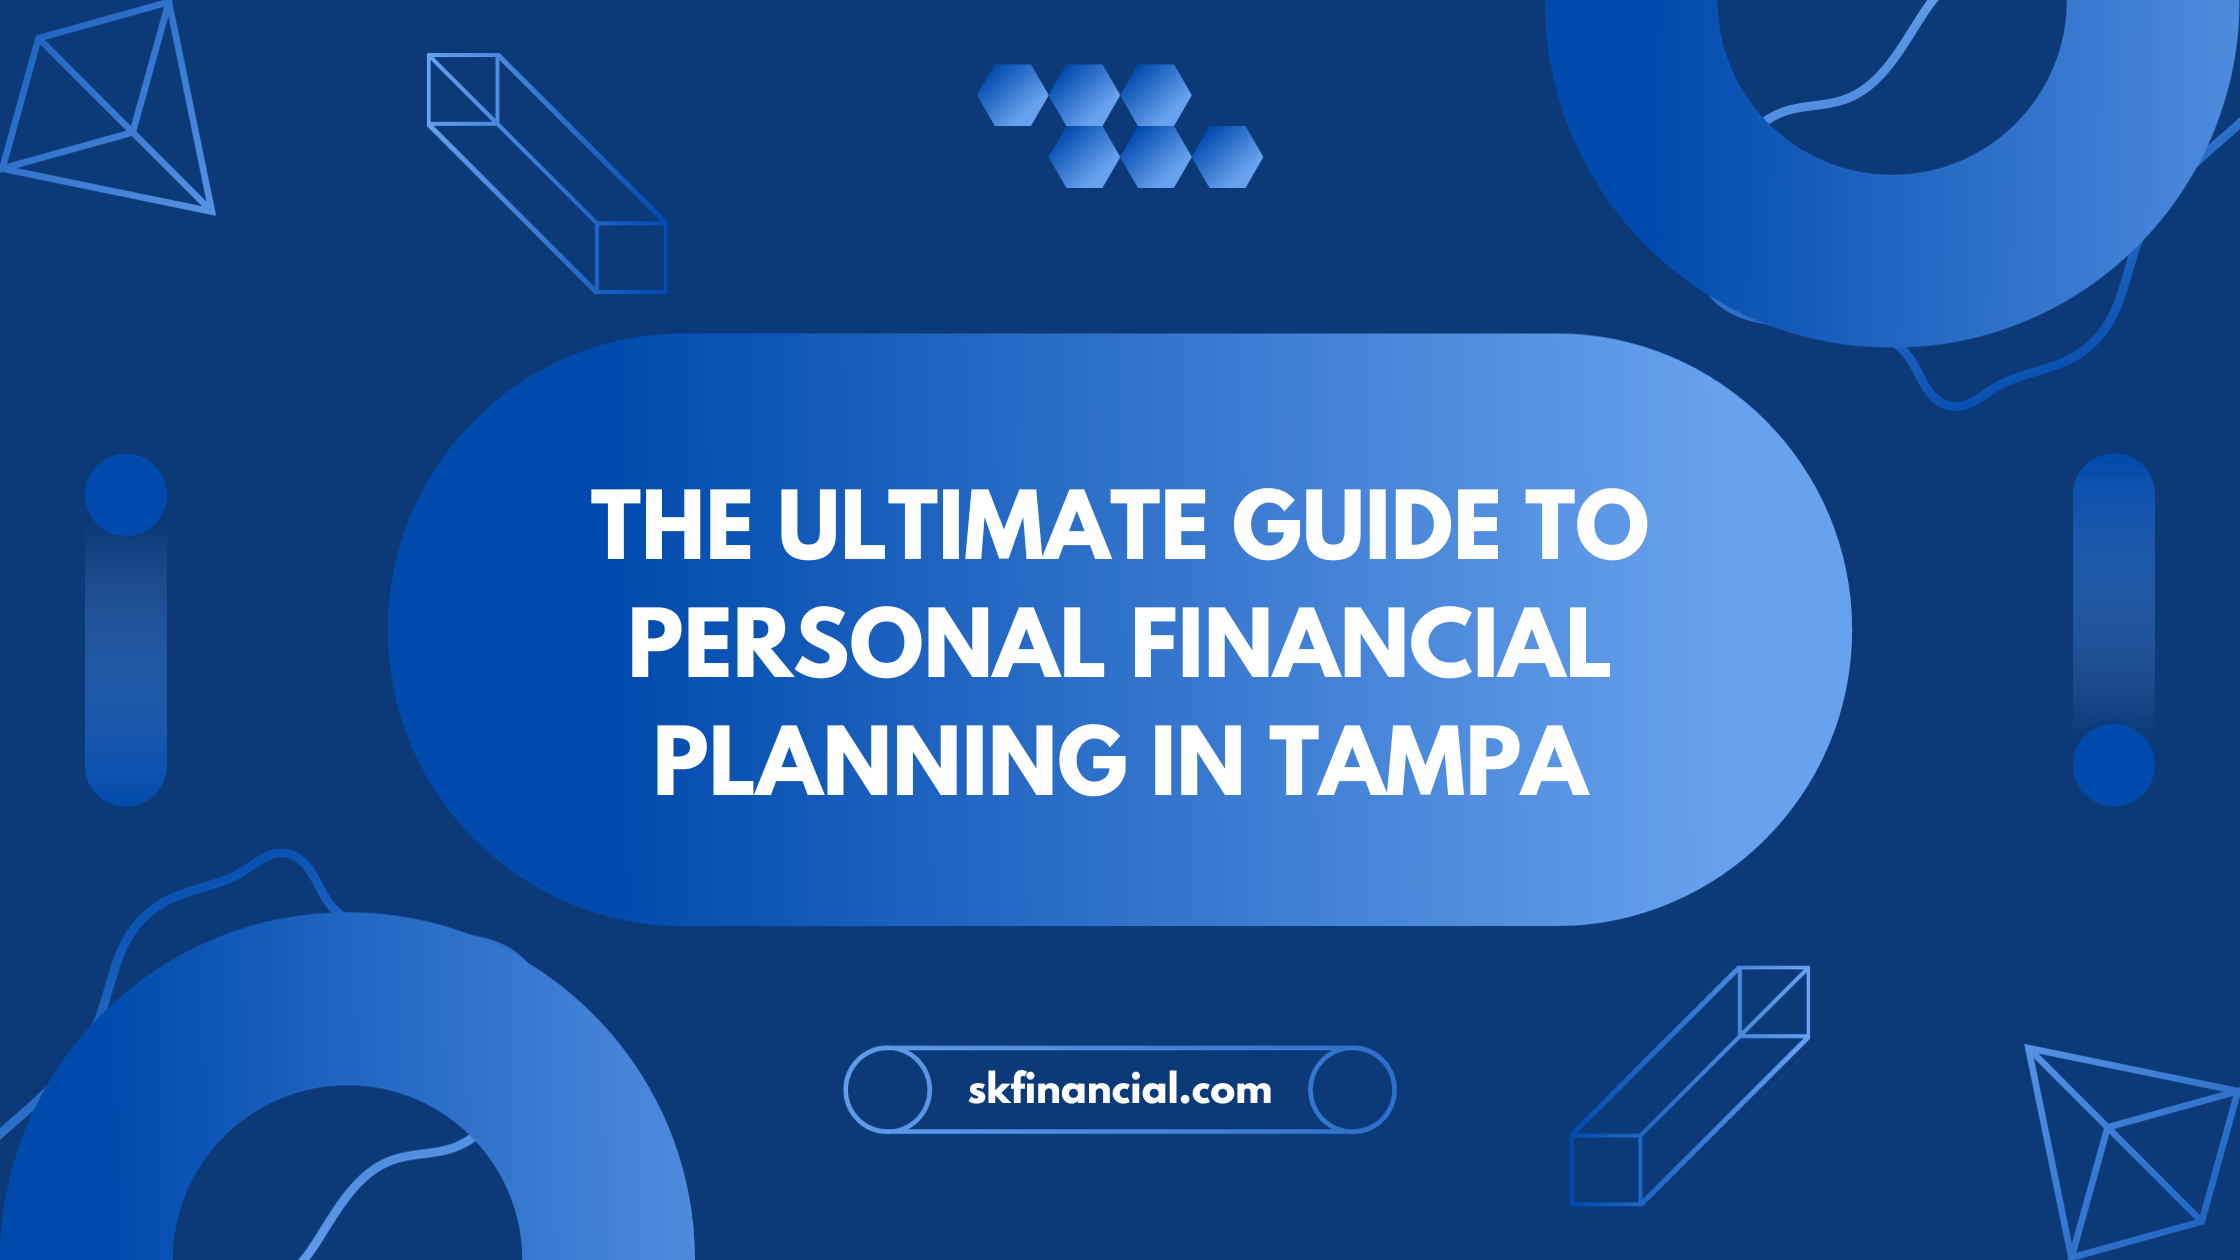 The Ultimate Guide to Personal Financial Planning in Tampa